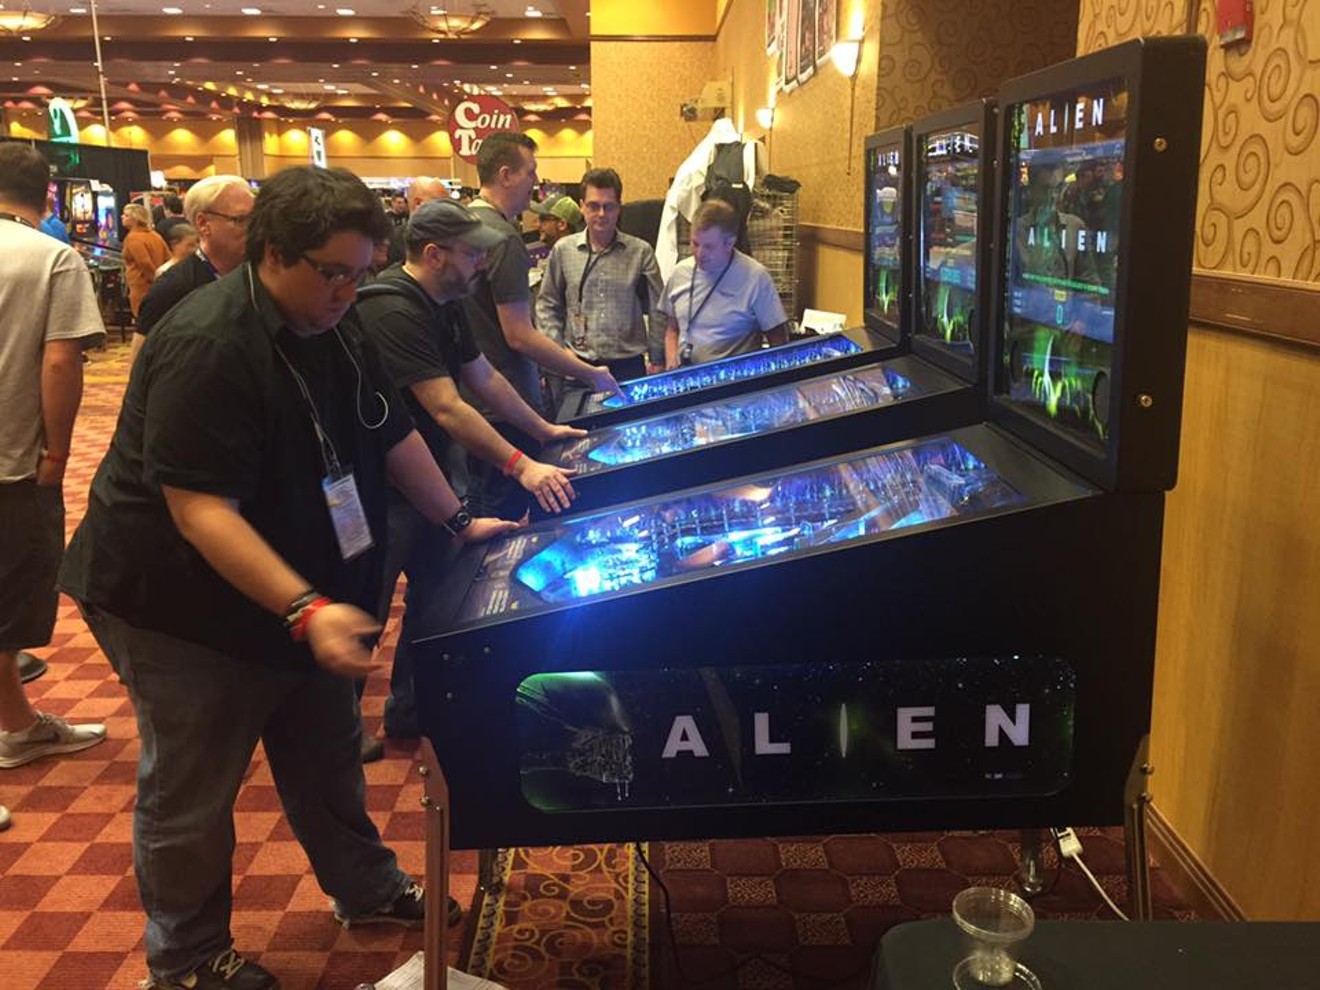 Danny Gallagher testing out the new Alien machine from  Heighway Pinball. It was one of the Texas Pinball Festival's biggest attractions.